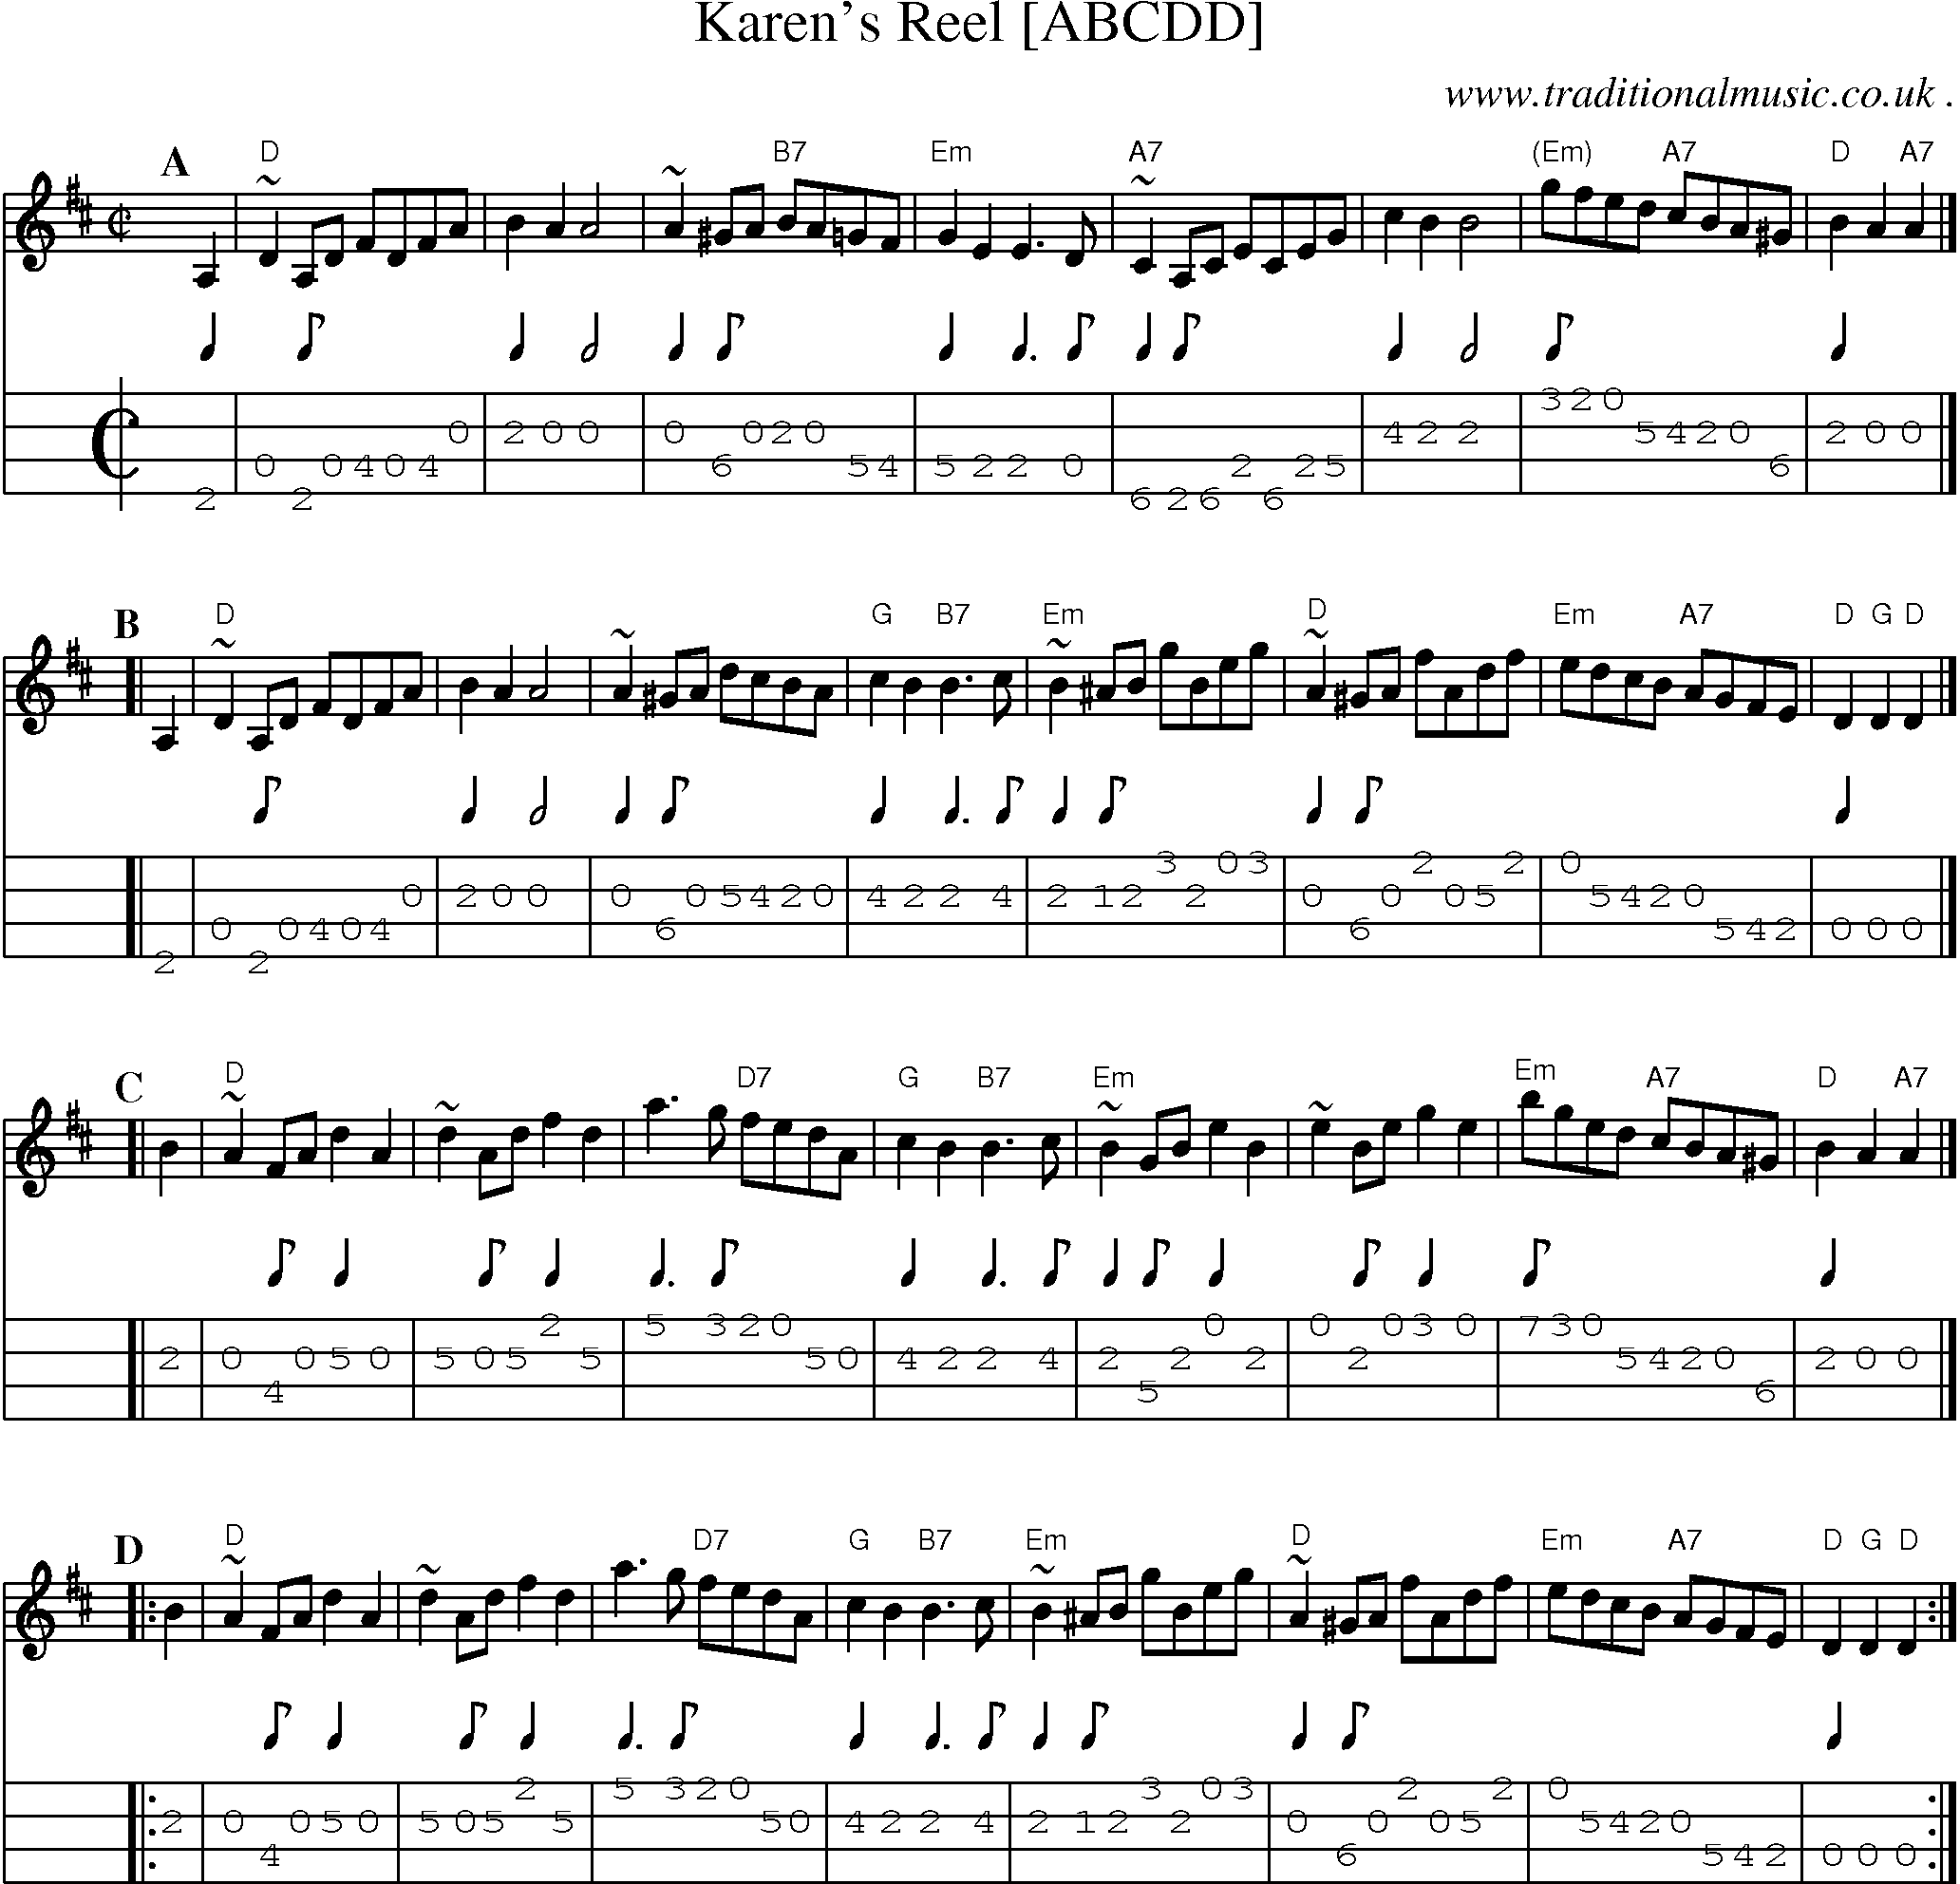 Sheet-music  score, Chords and Mandolin Tabs for Karens Reel [abcdd]